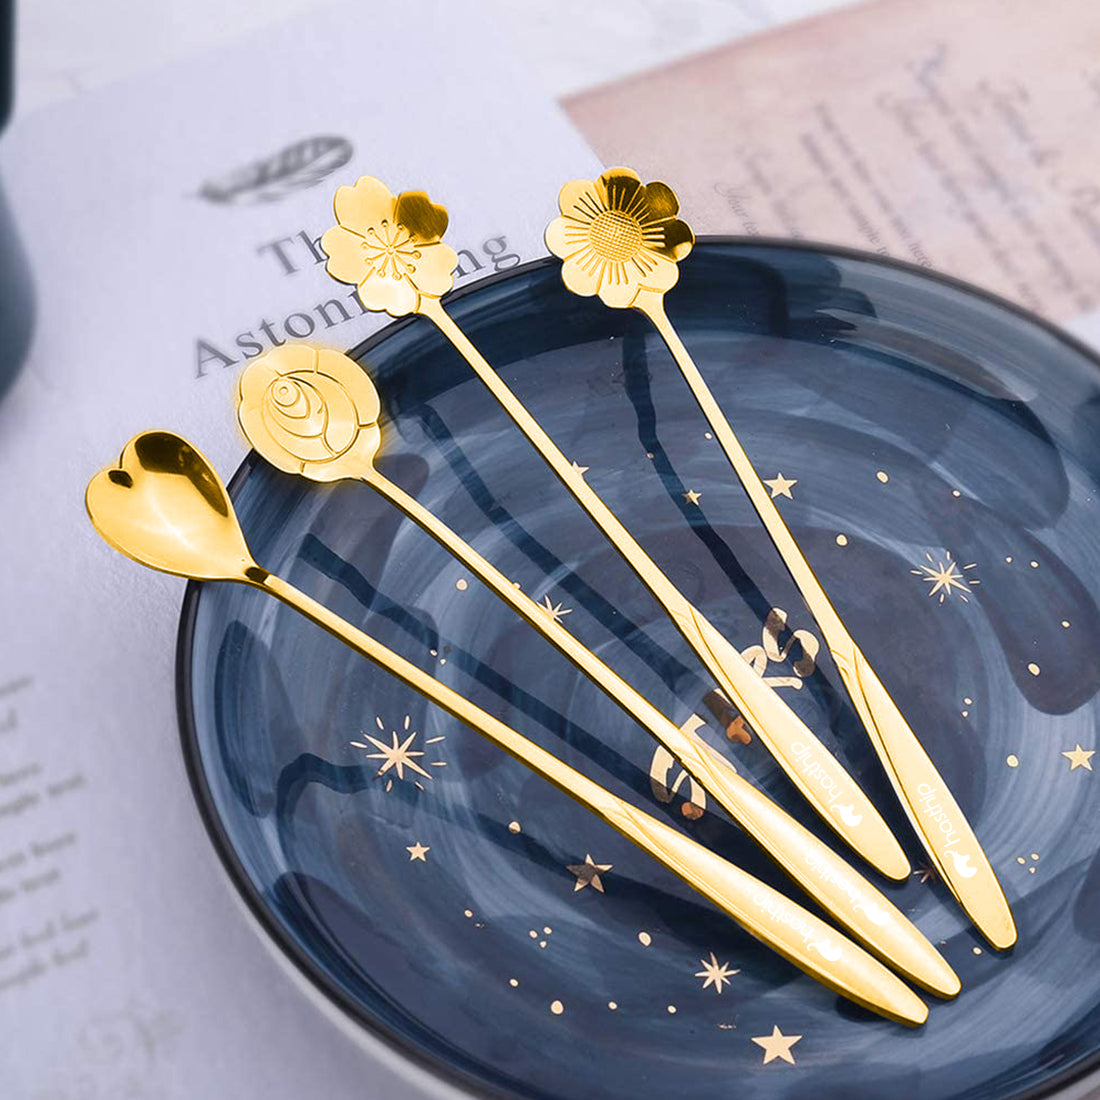 HASTHIP® Golden Spoon Set/Coffee Spoon/Dessert Spoon/Cutlery Kitchen Tableware/Stainless Steel Gold Flower Shape Coffee Spoon with Package Bag, 18cm, 4 Pcs Different Coffee Spoon